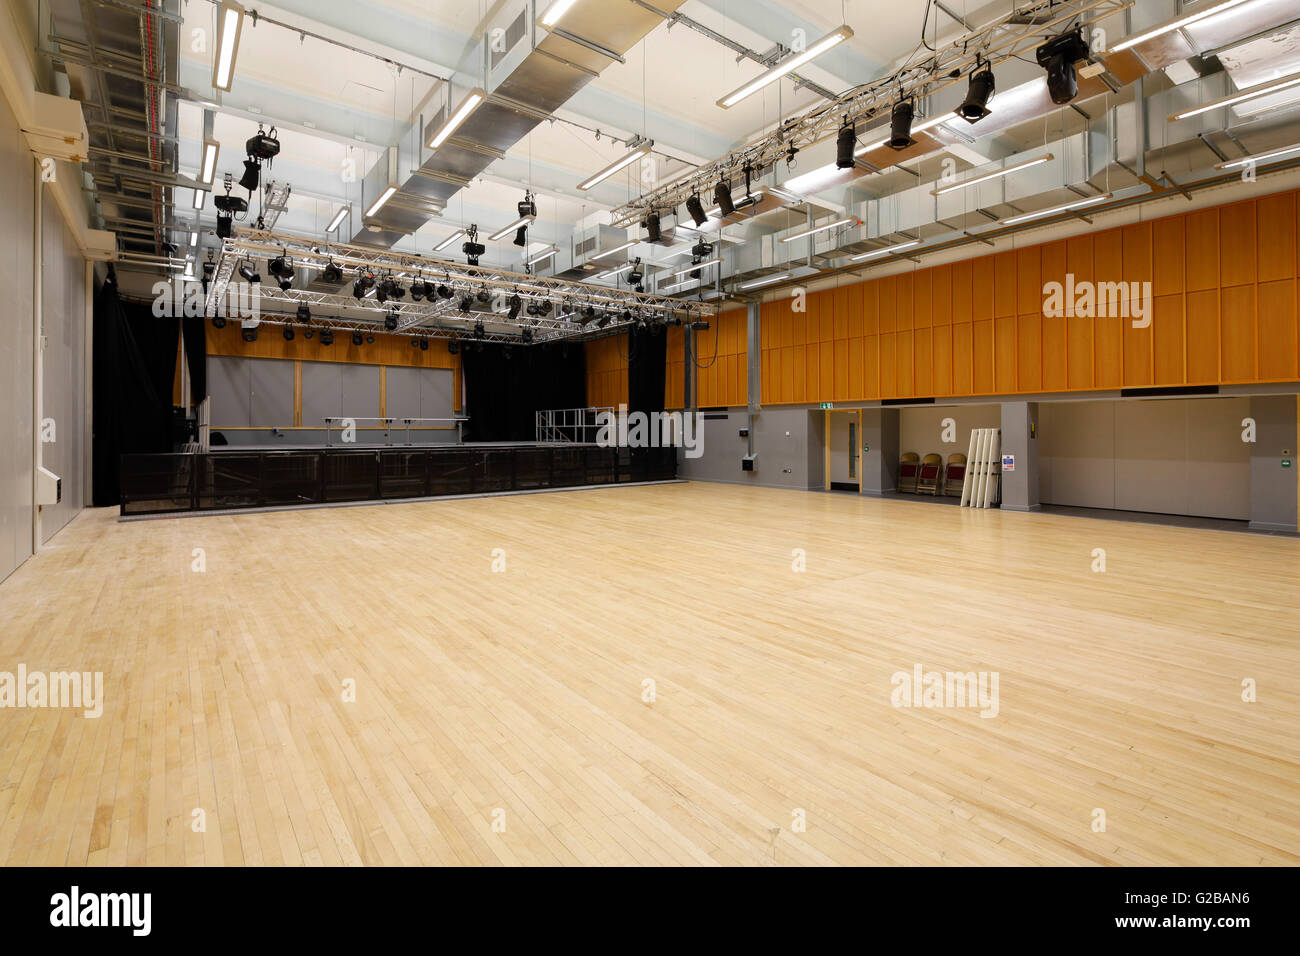 Richmond Building, University of Bristol Student's Union refurbishment. Activity Rooms, The Anson Rooms venue and bar spaces and link areas. Spacious industrial hall area. Stock Photo